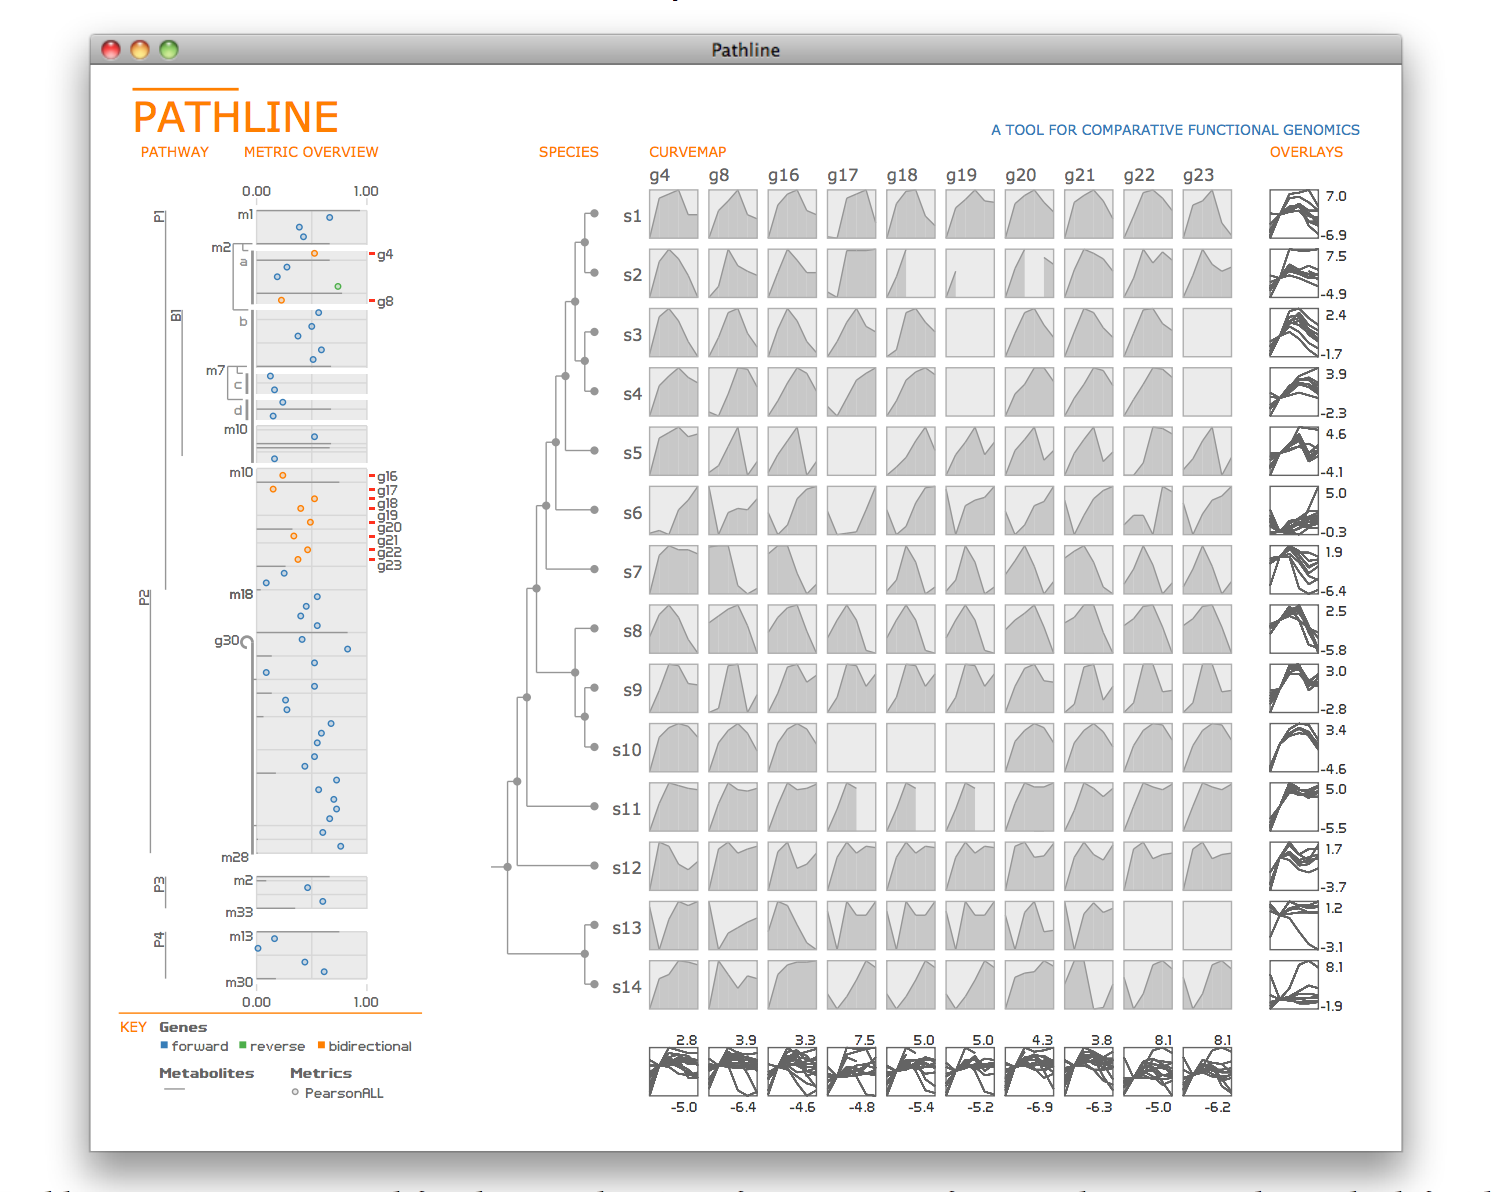 Pathline: A Tool for Comparative Functional Genomics